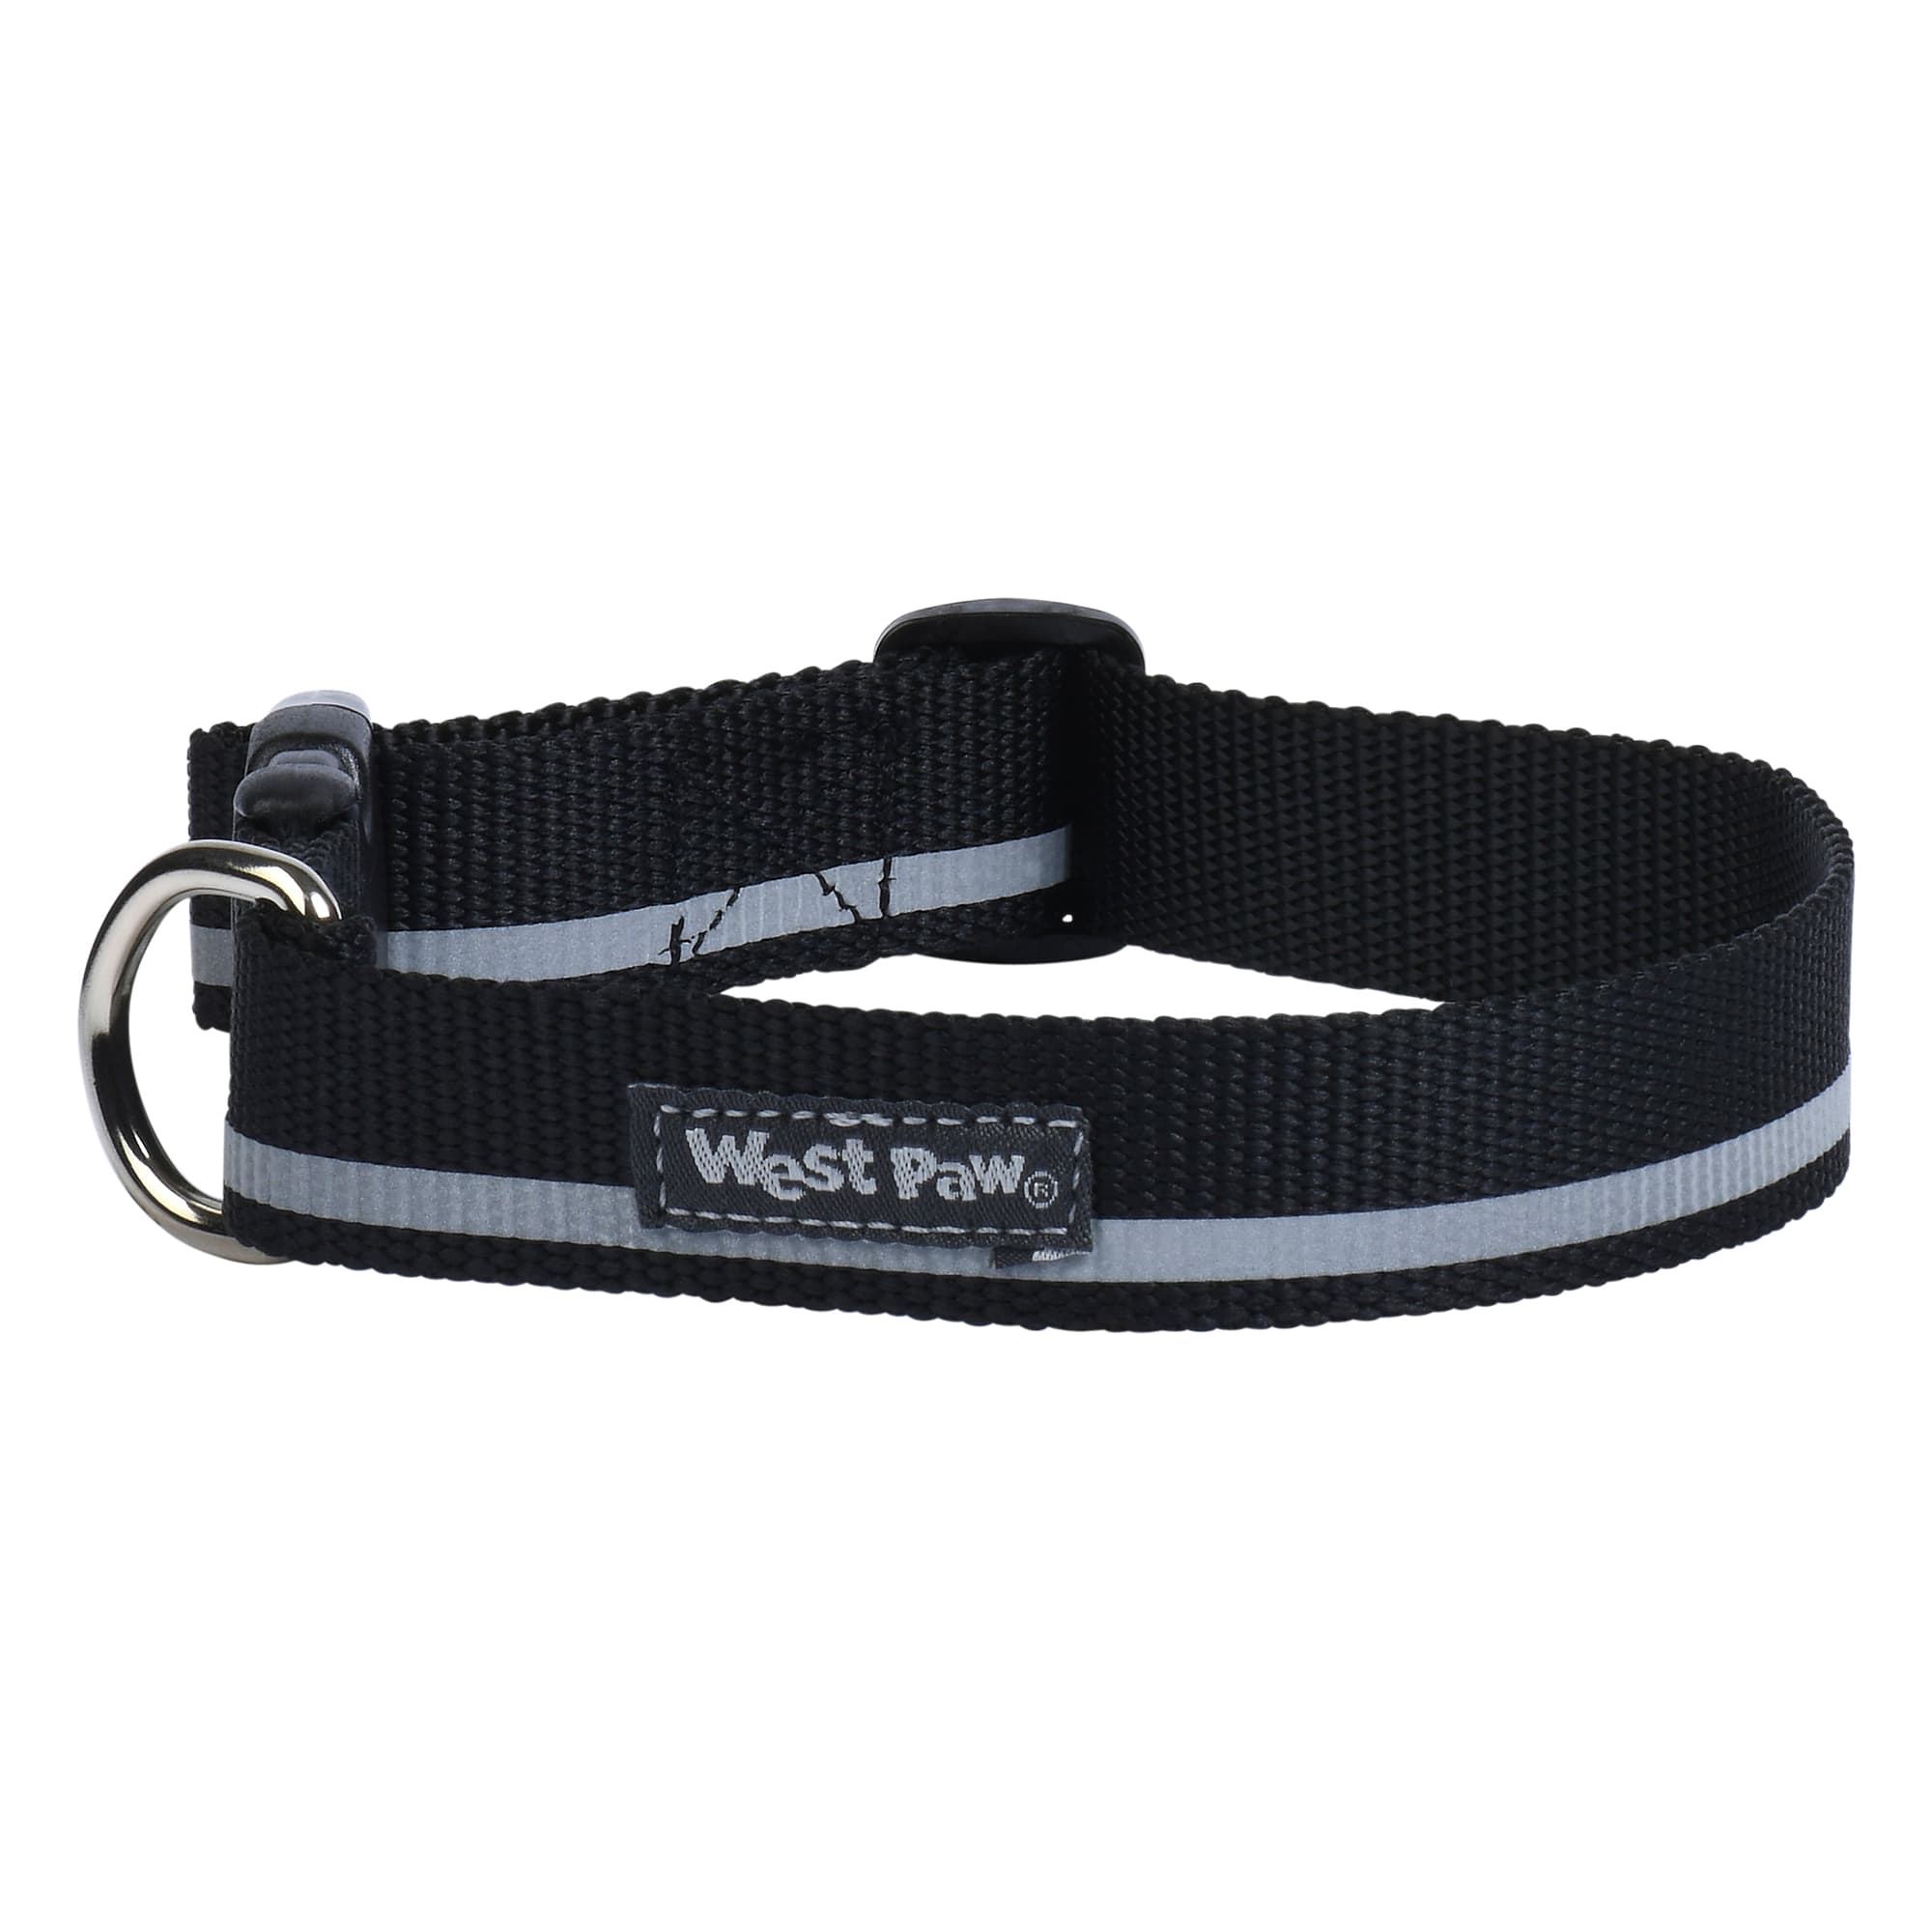 Harnesses Made in USA Western Starburst and Leashes Pet Collars